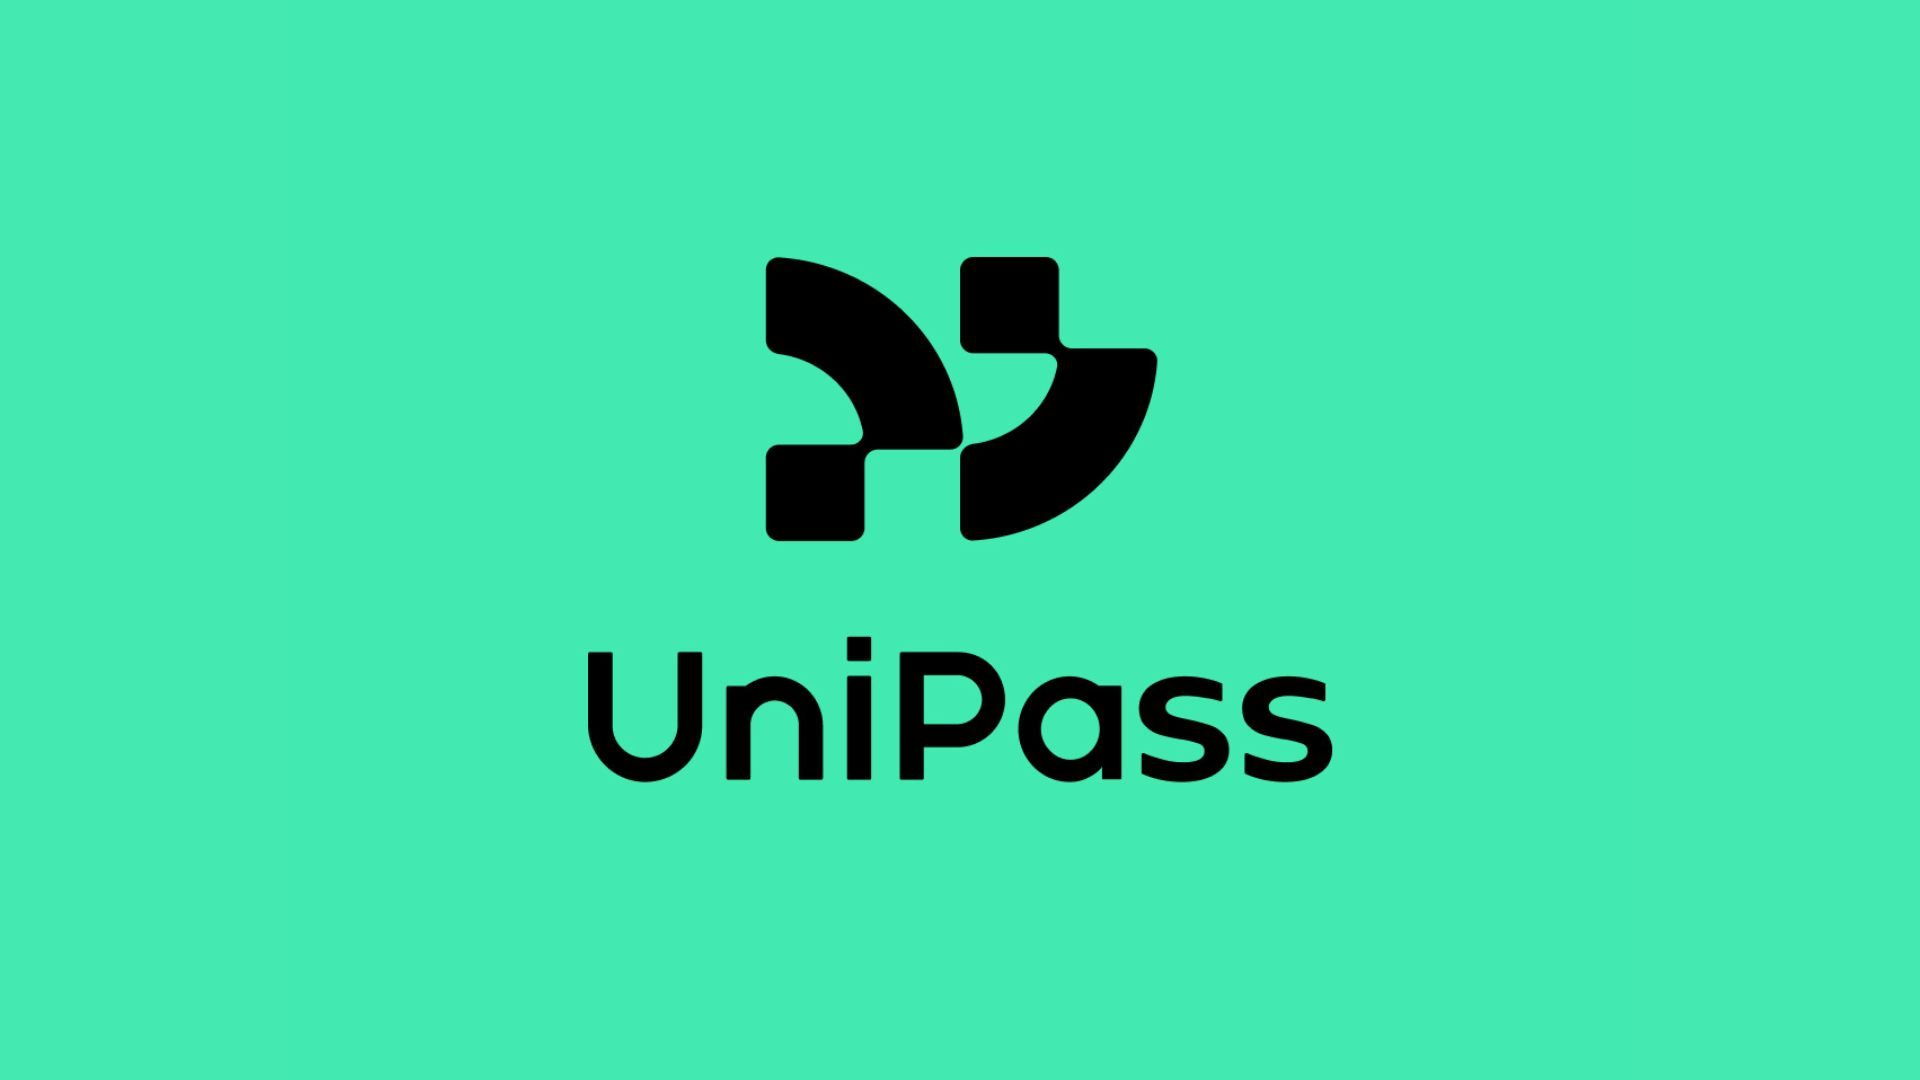 Blockchain startup UniPass Wallet offers cross-border payments solution for freelancers